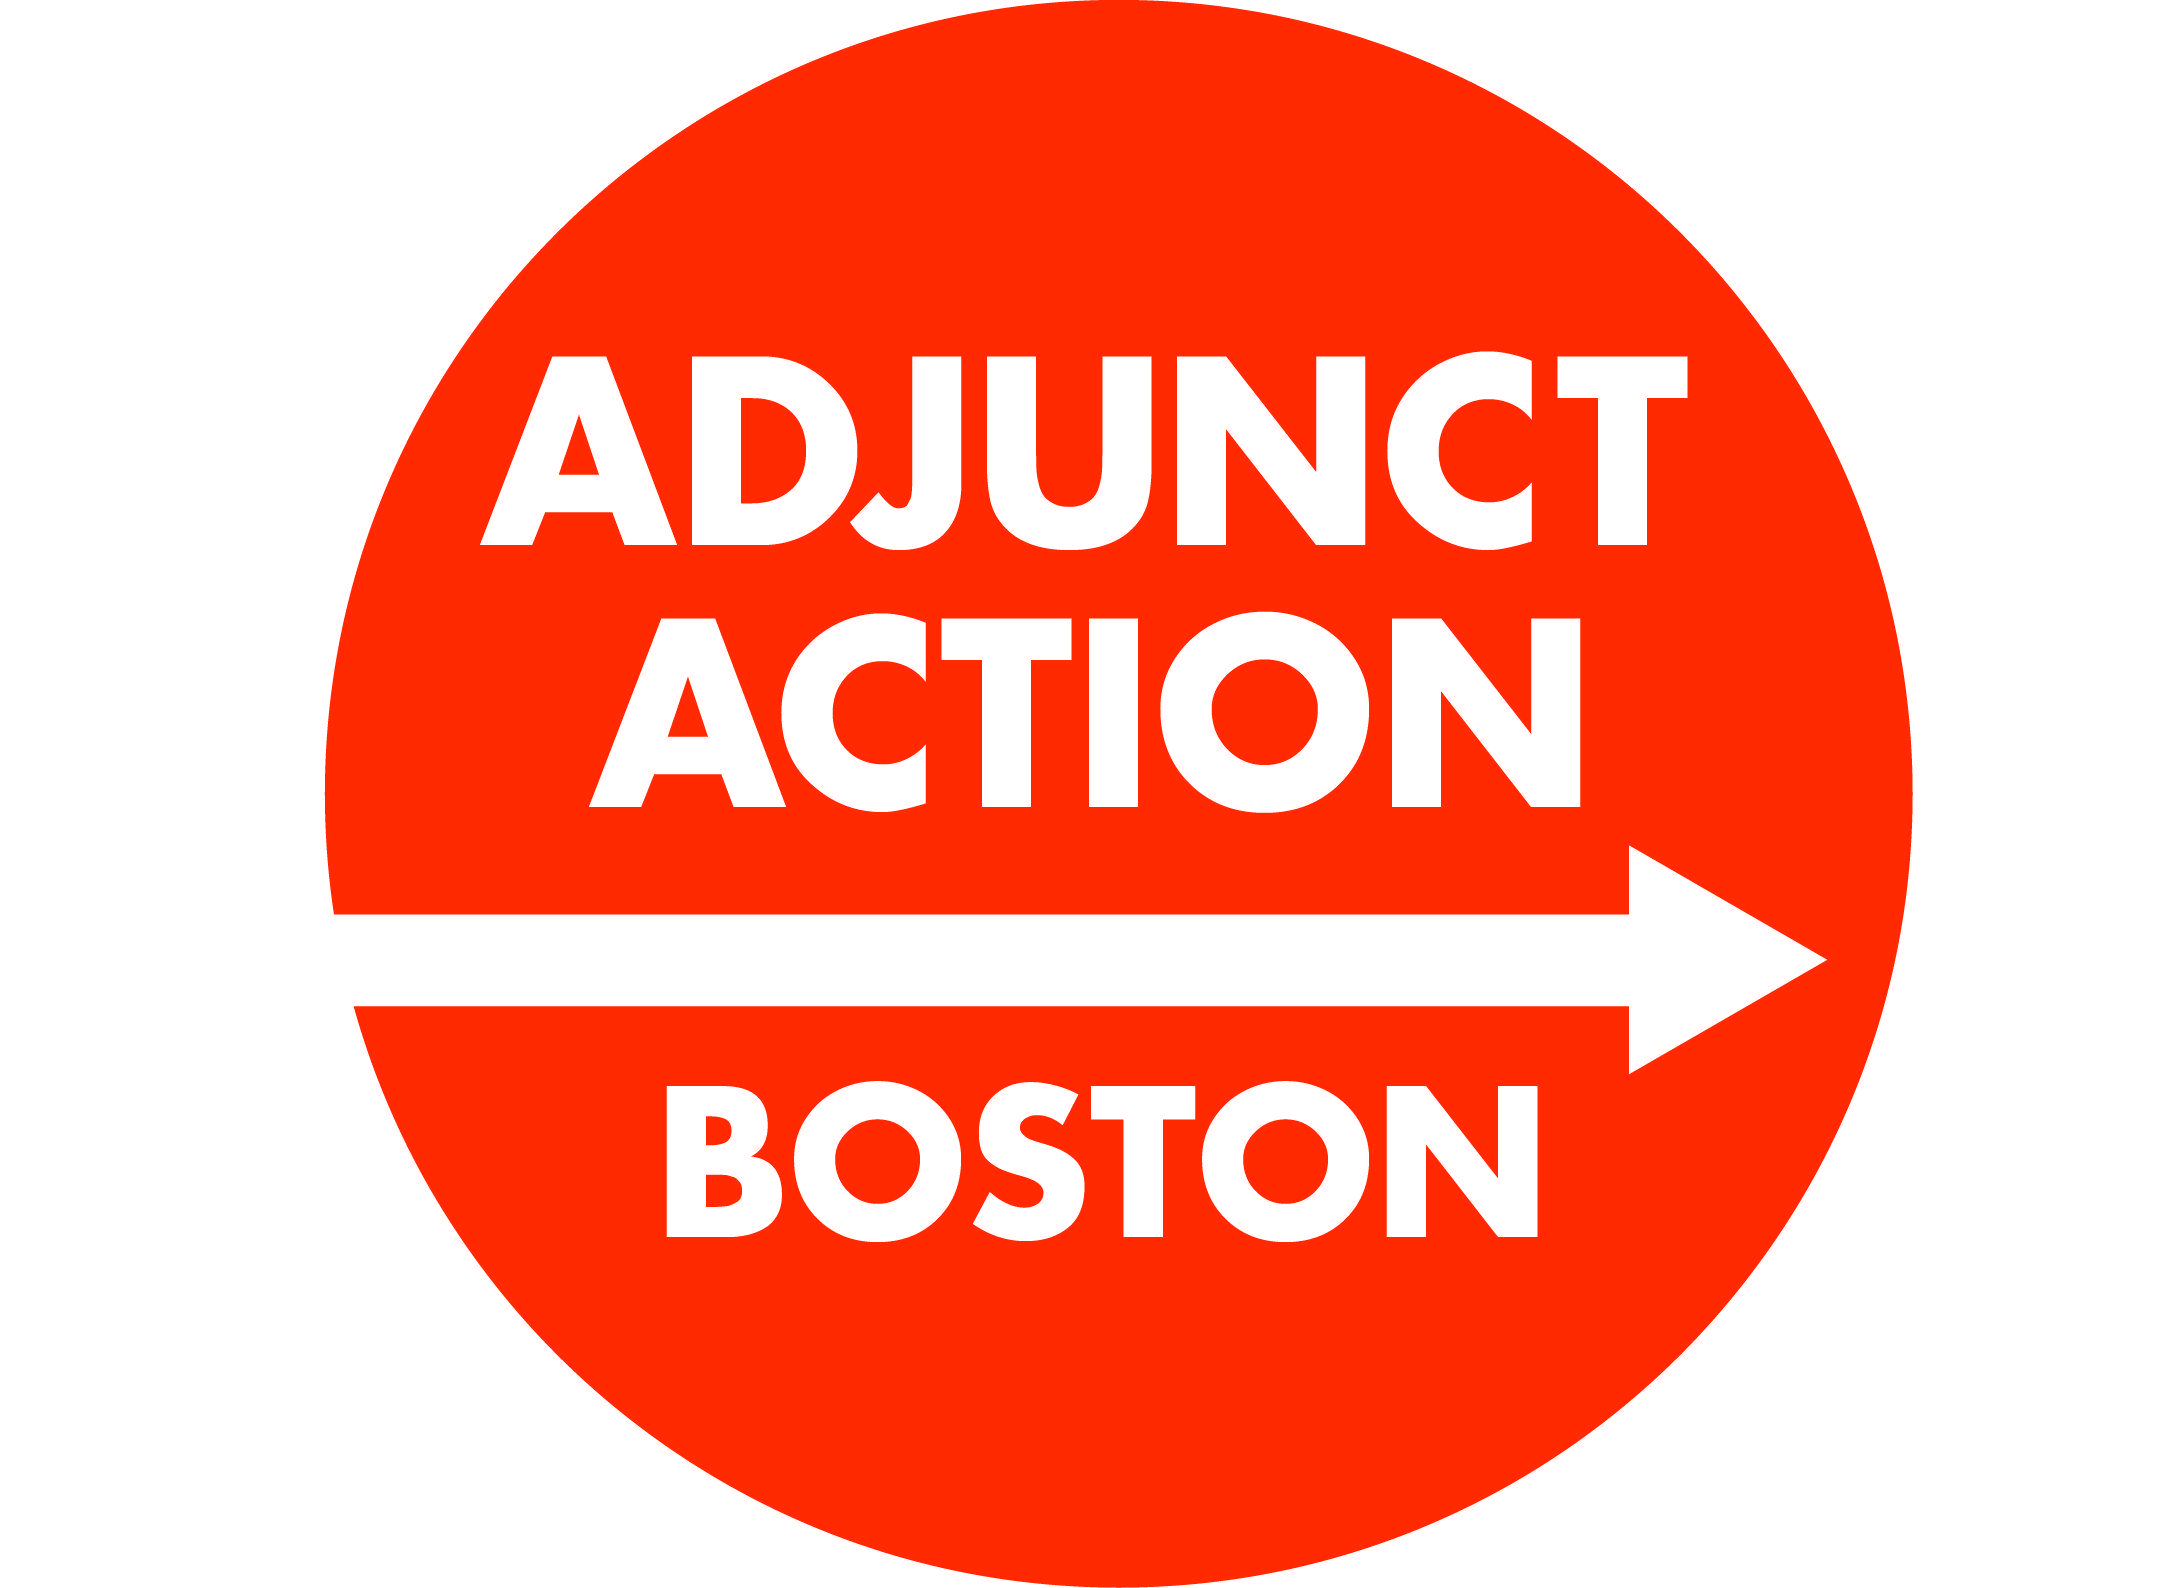 Union Yes Logo - Lesley Adjunct Faculty Vote 'Union YES,' Join Adjunct Action/SEIU